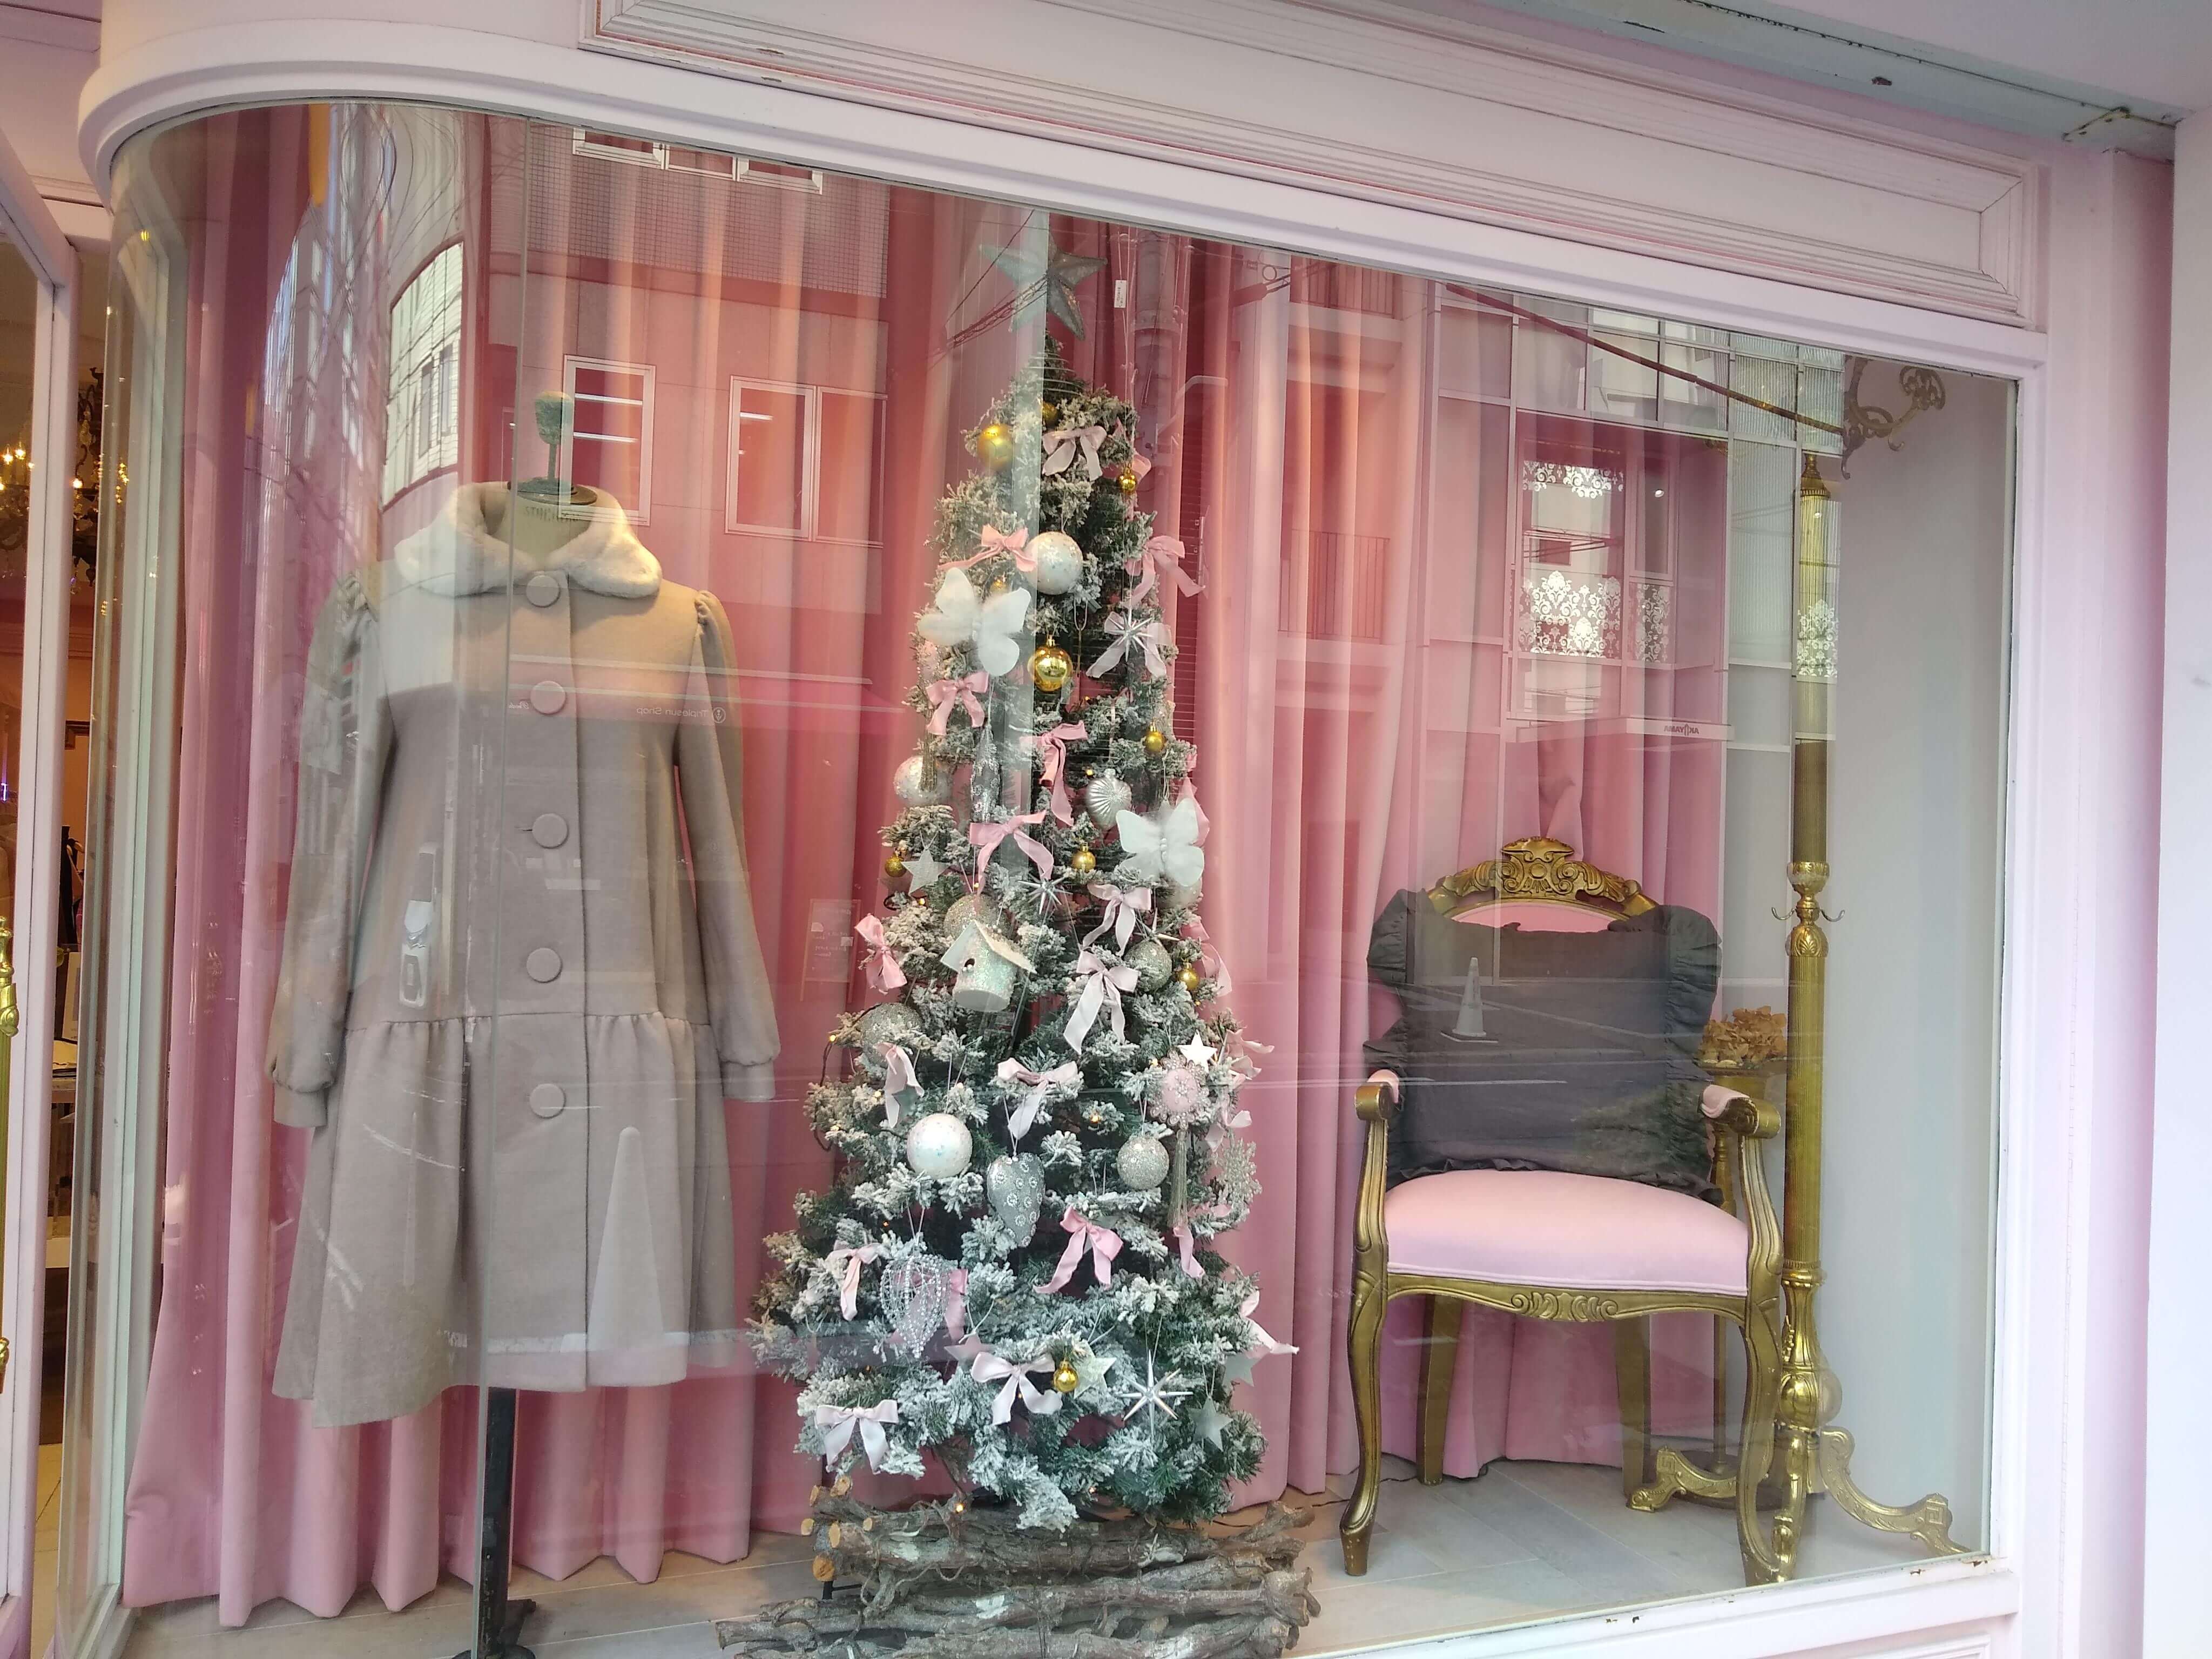 Japanese store decorated with a Christmas tree